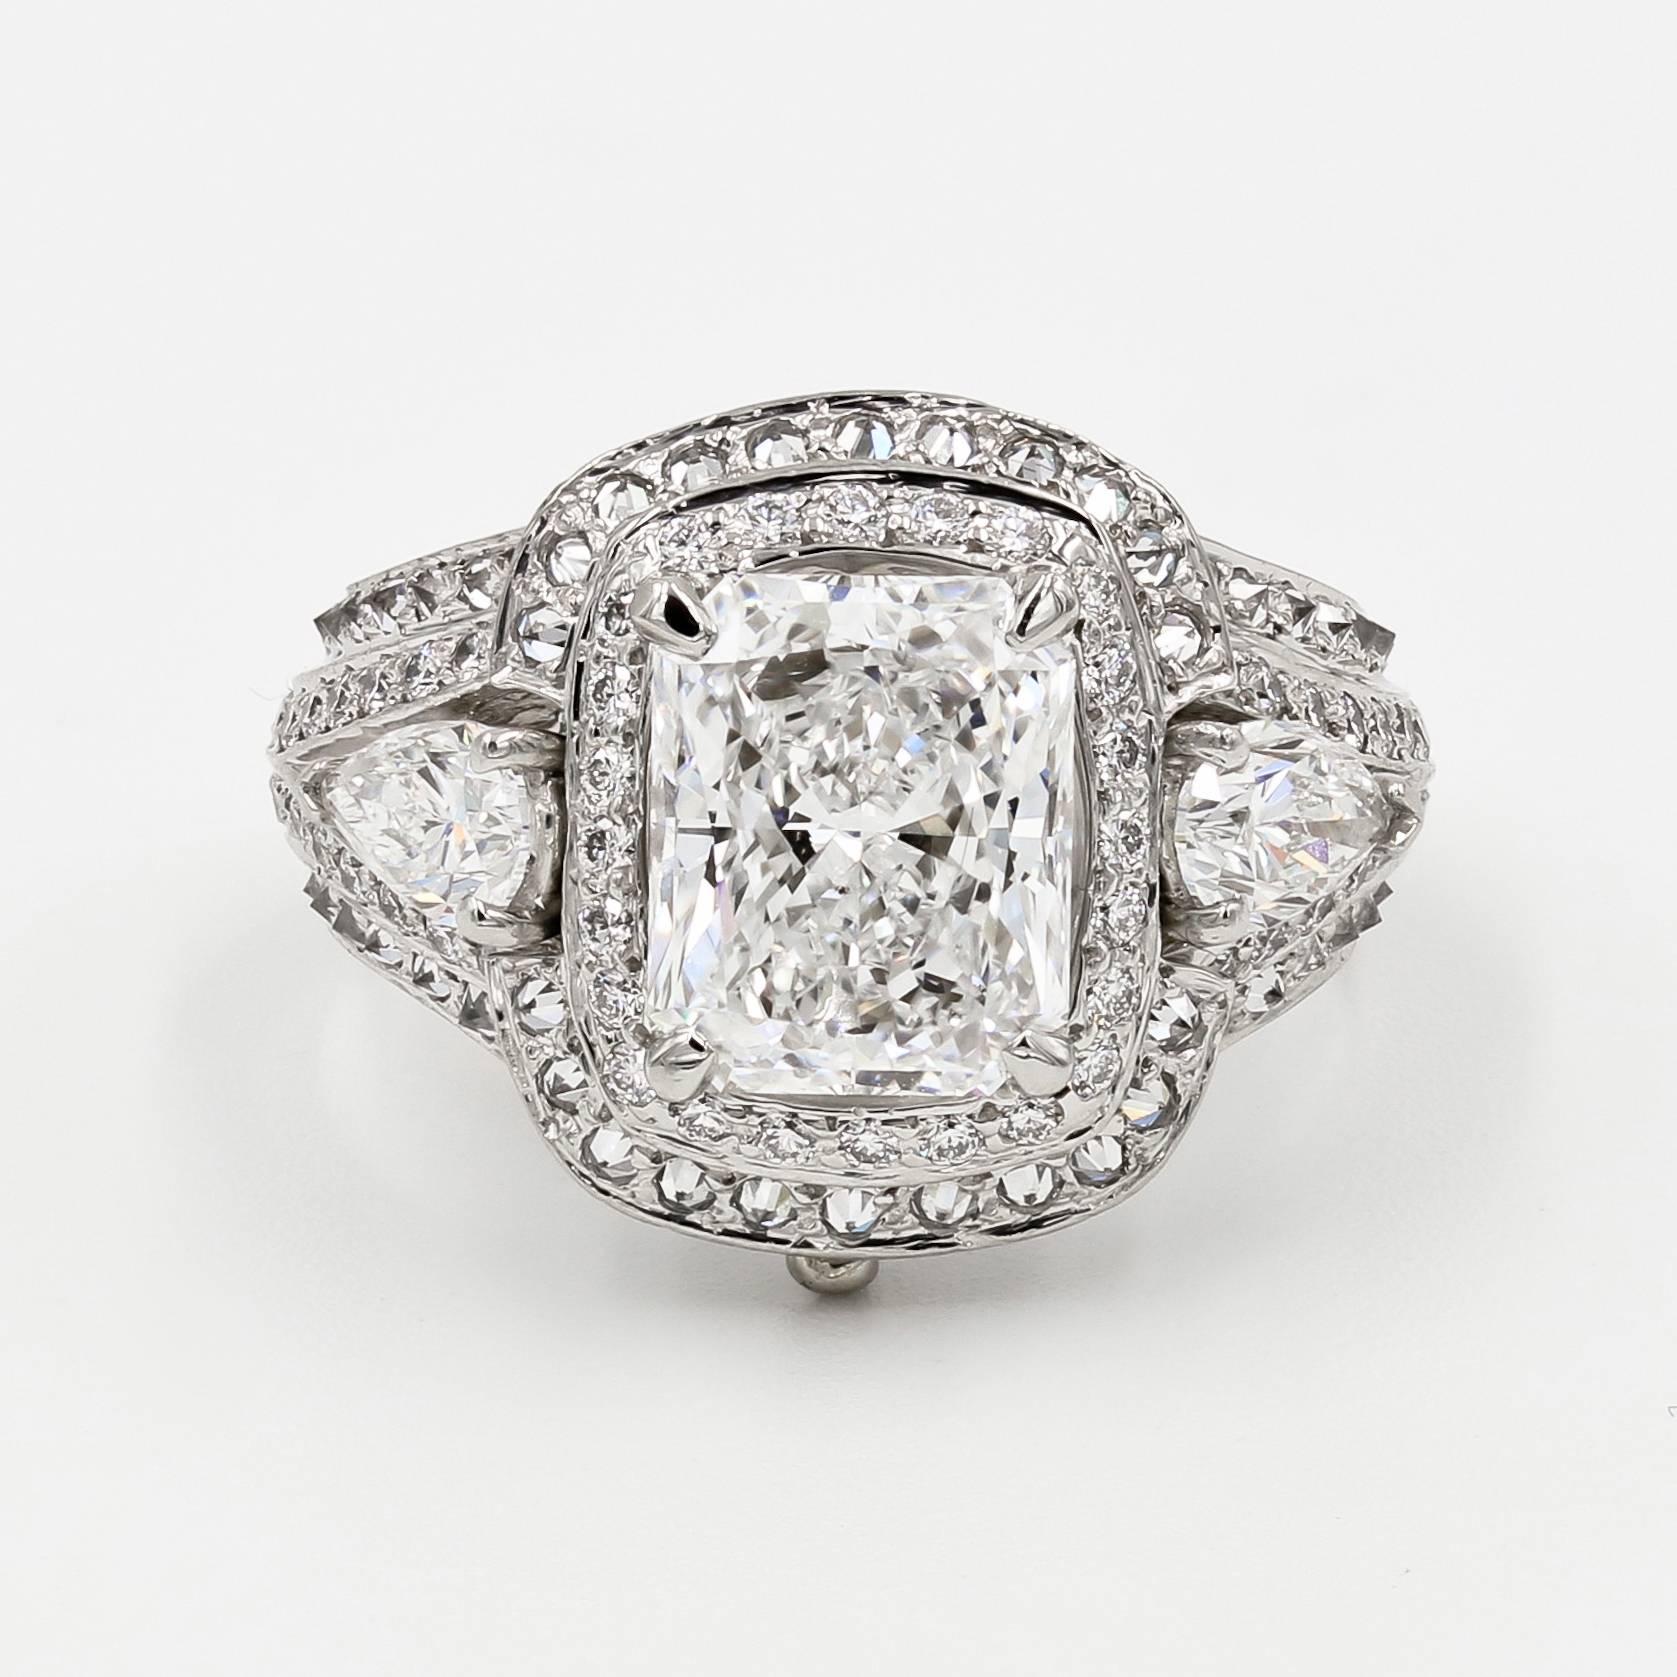 Contemporary GIA Certified 3.21cts. Radiant Cut Diamond Ring - Interchange Side Stones For Sale